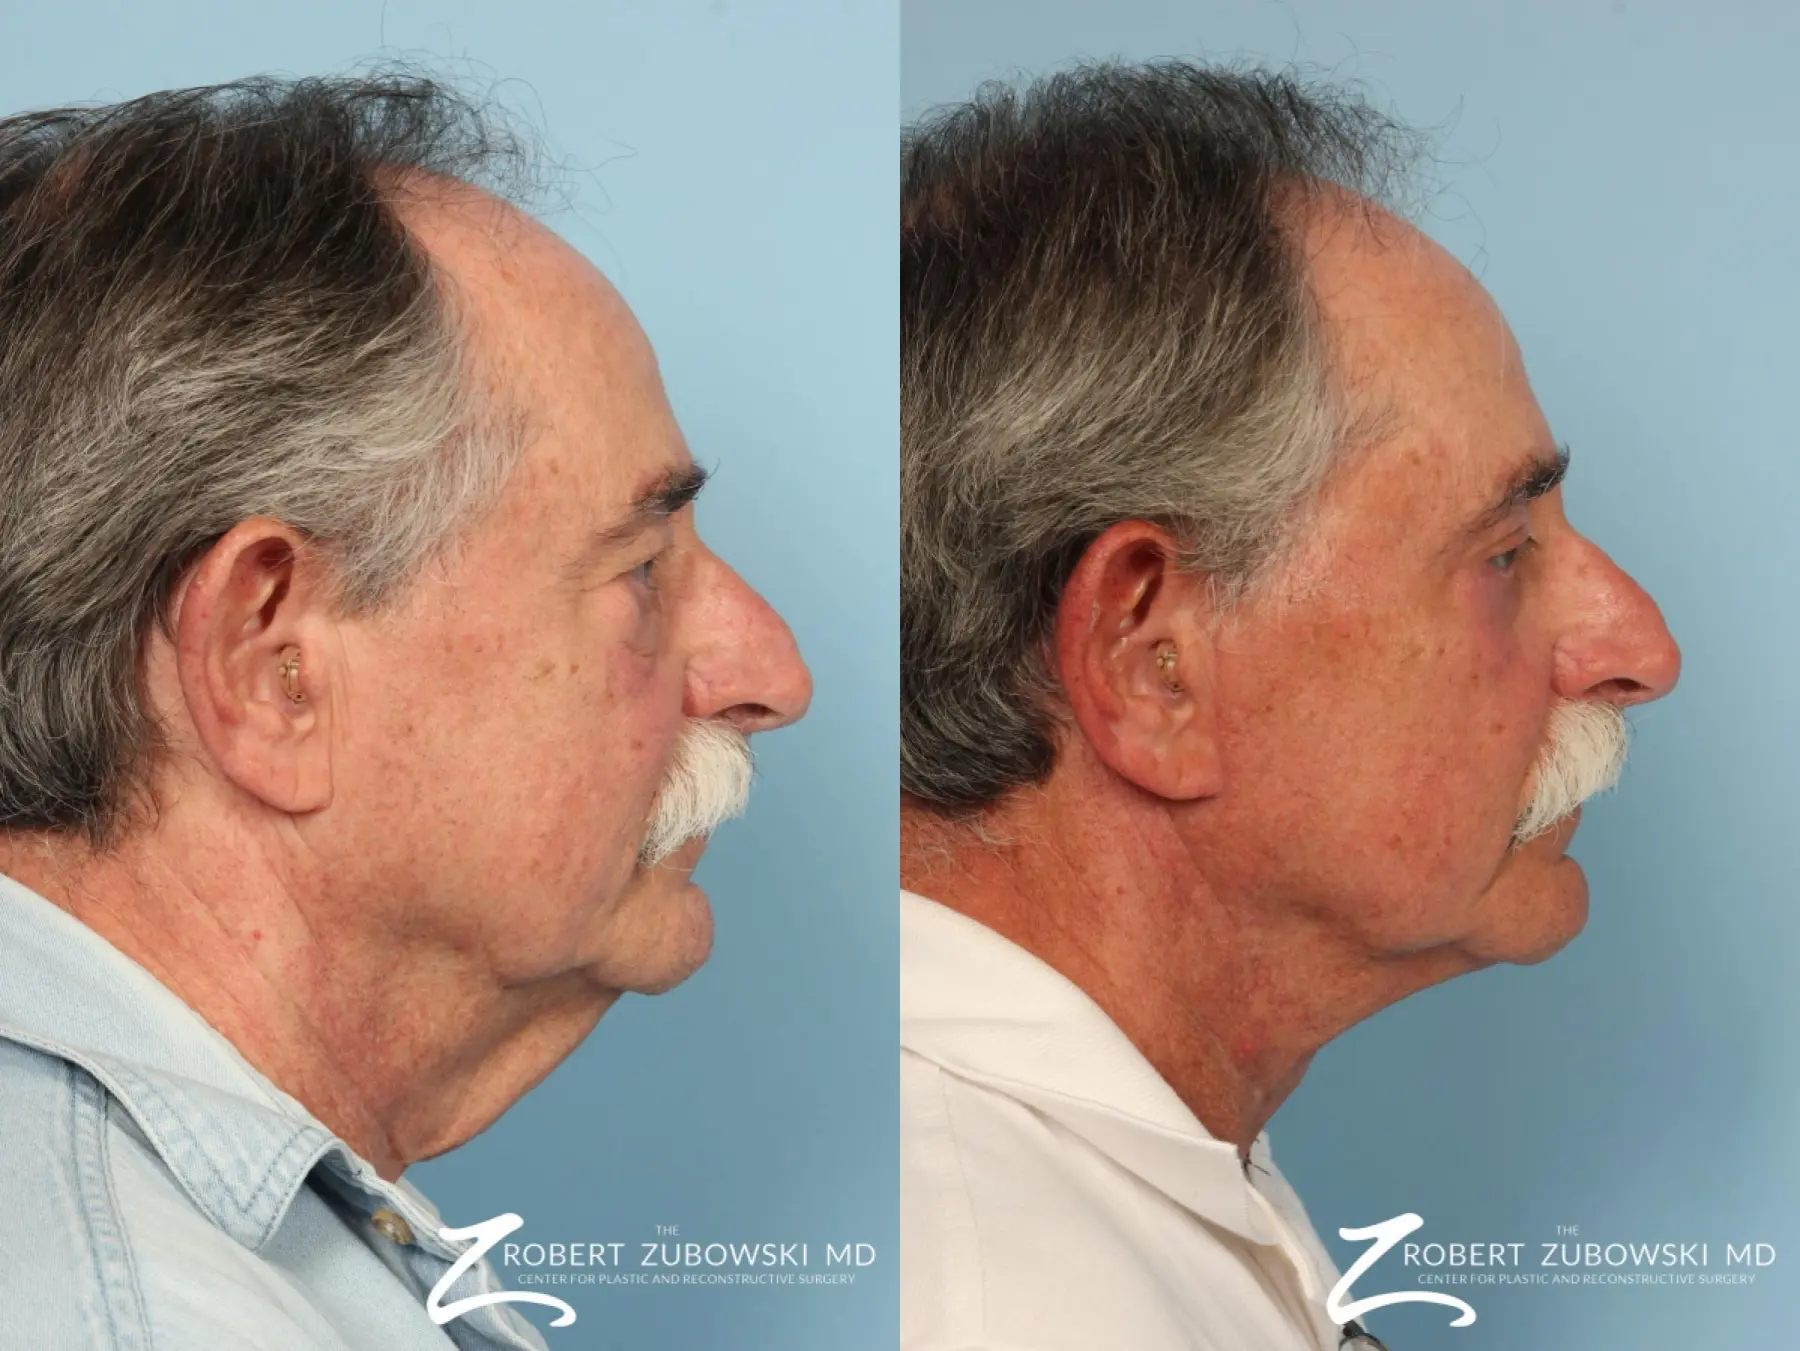 Blepharoplasty For Men: Patient 2 - Before and After 2